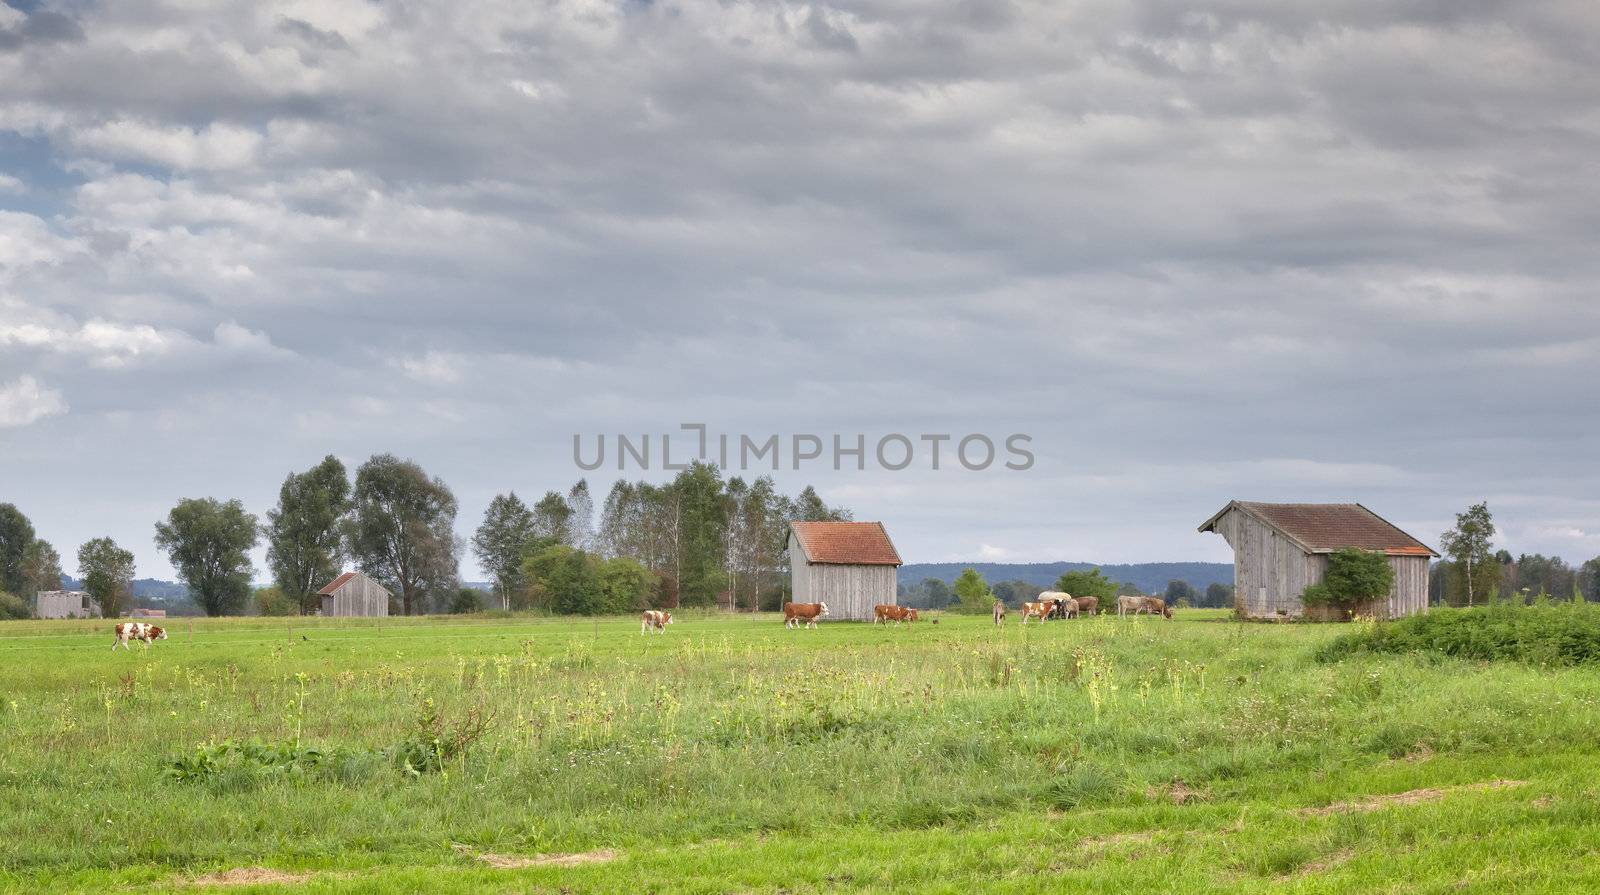 An image of a bavarian landscape with cows